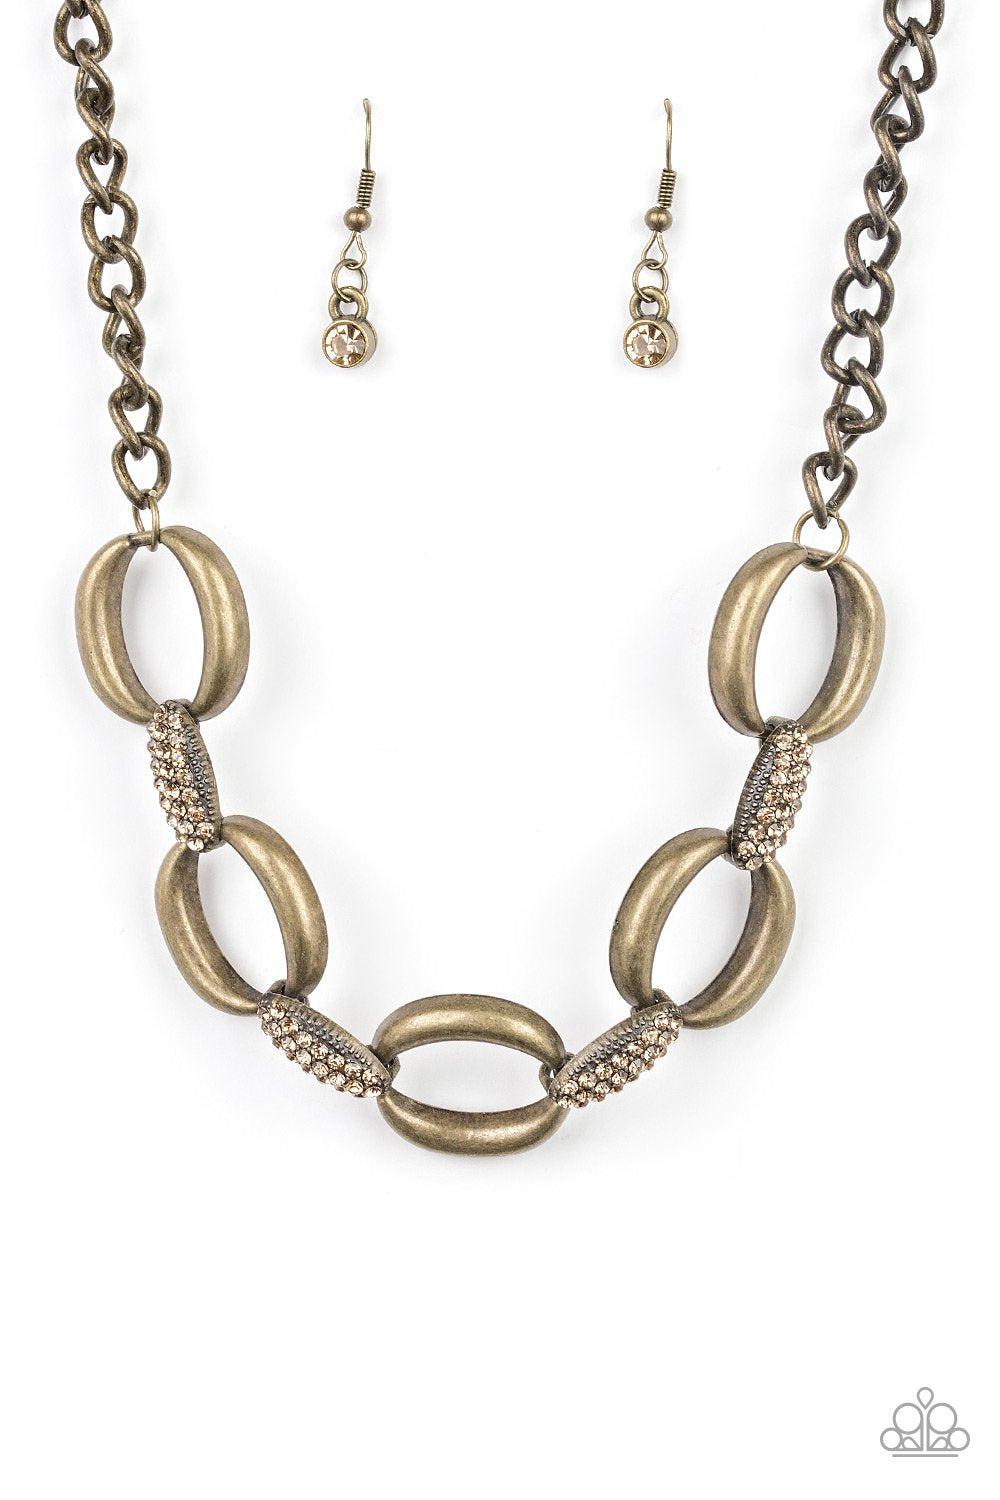 Boss Boulevard Brass and Rhinestone Chain Link Necklace - Paparazzi Accessories-CarasShop.com - $5 Jewelry by Cara Jewels